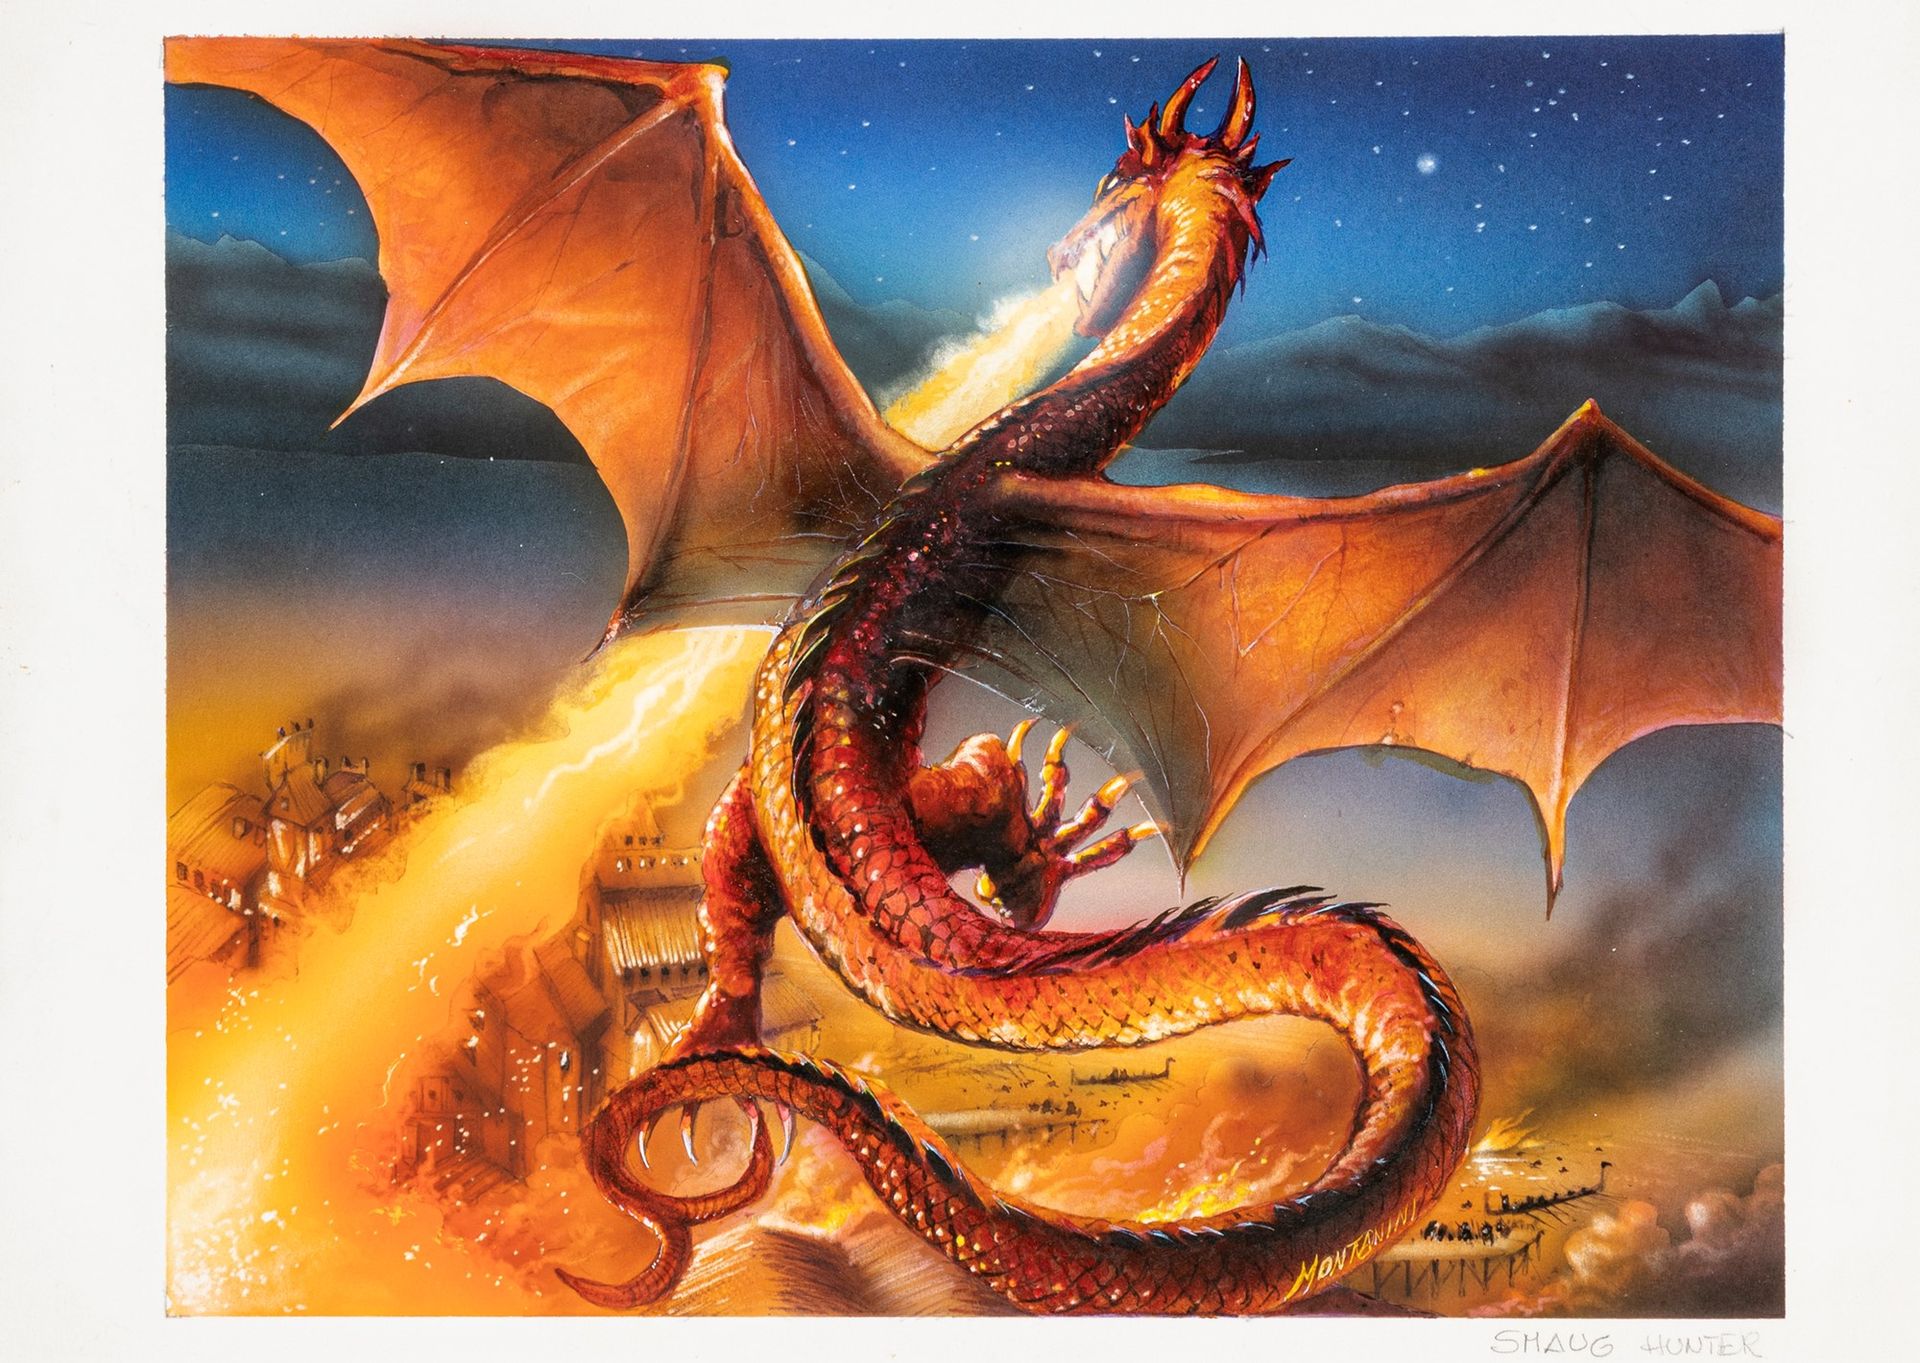 Angelo Montanini Smaug Ahunt, 1996

ink, tempera and airbrush on thin cardboard
&hellip;